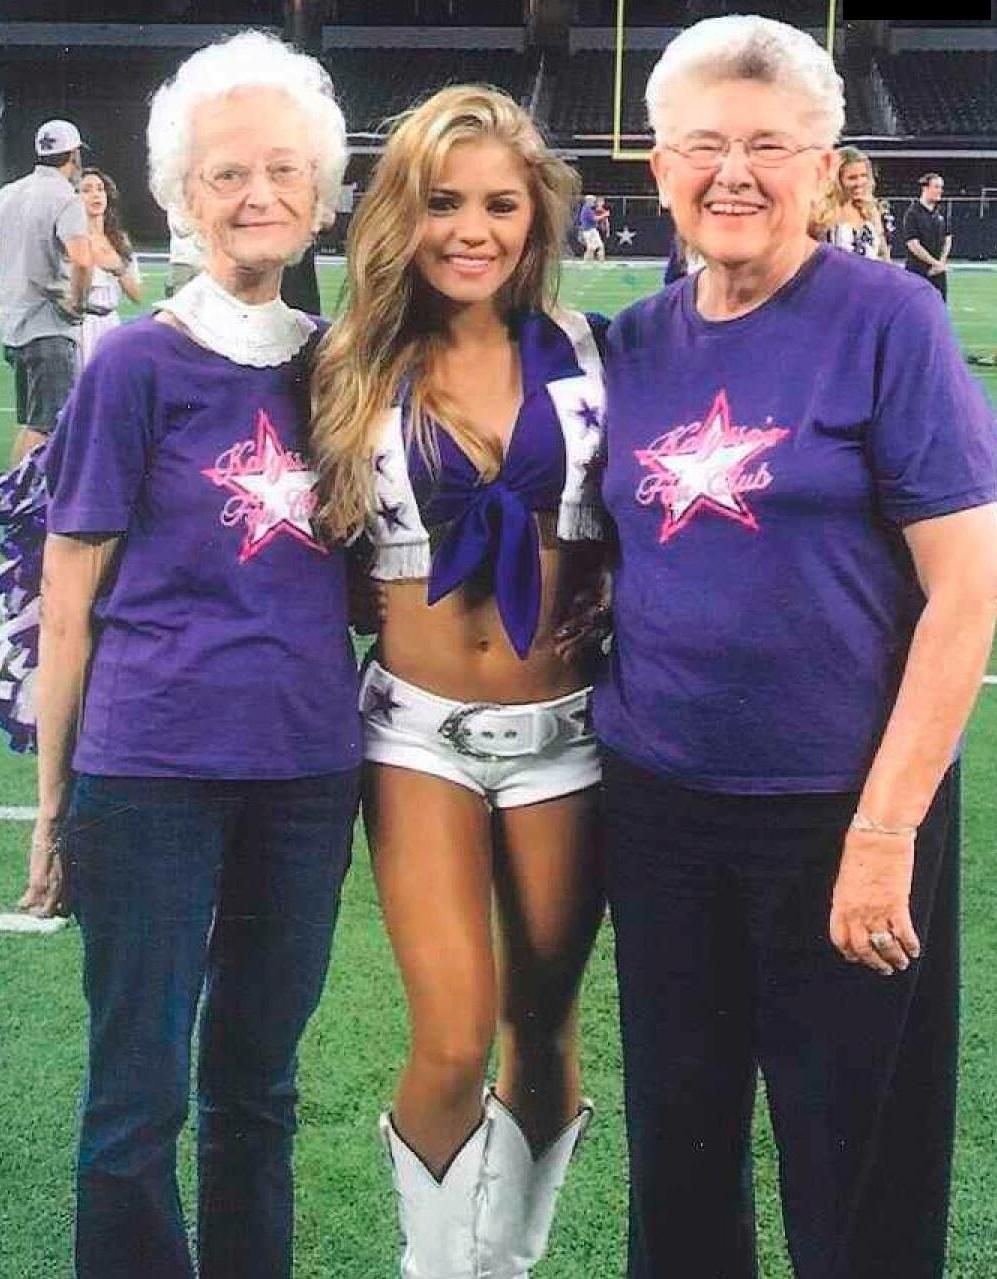 Here's a photo of a current Cowboys cheerleader with two cheerleaders from their last Superbowl Team.